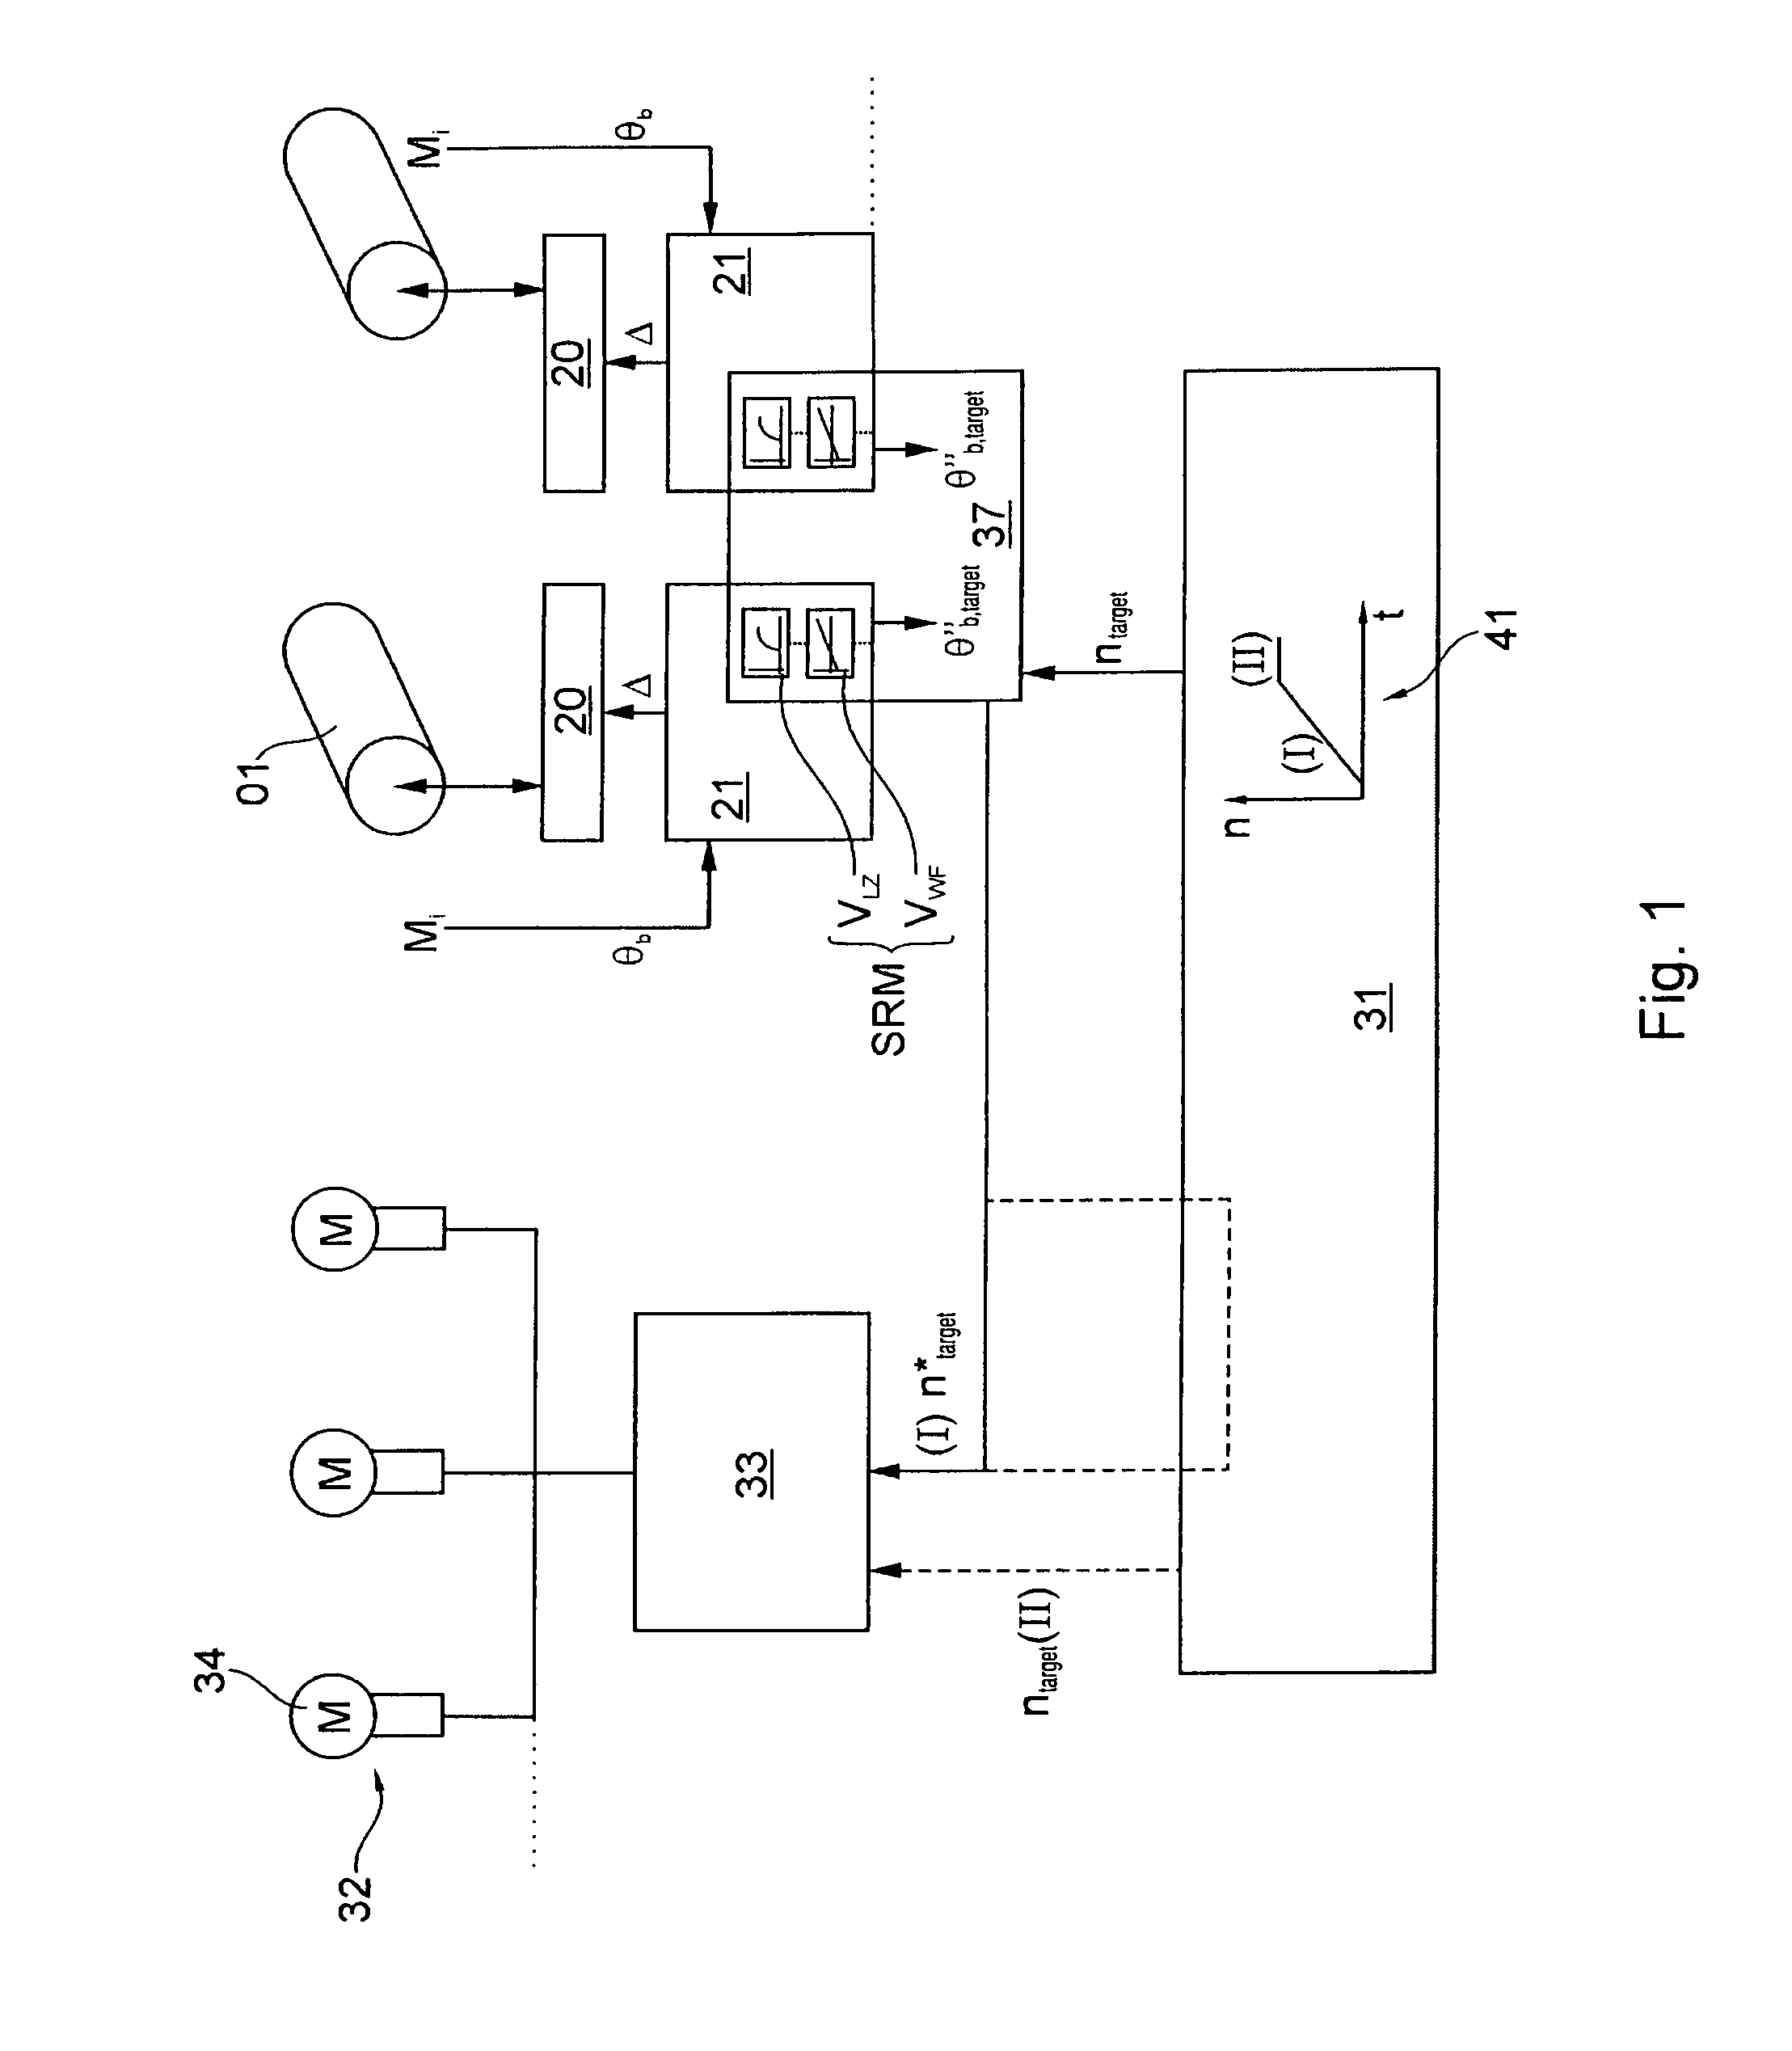 Method and device for controlling at least one rotating component of a printing press